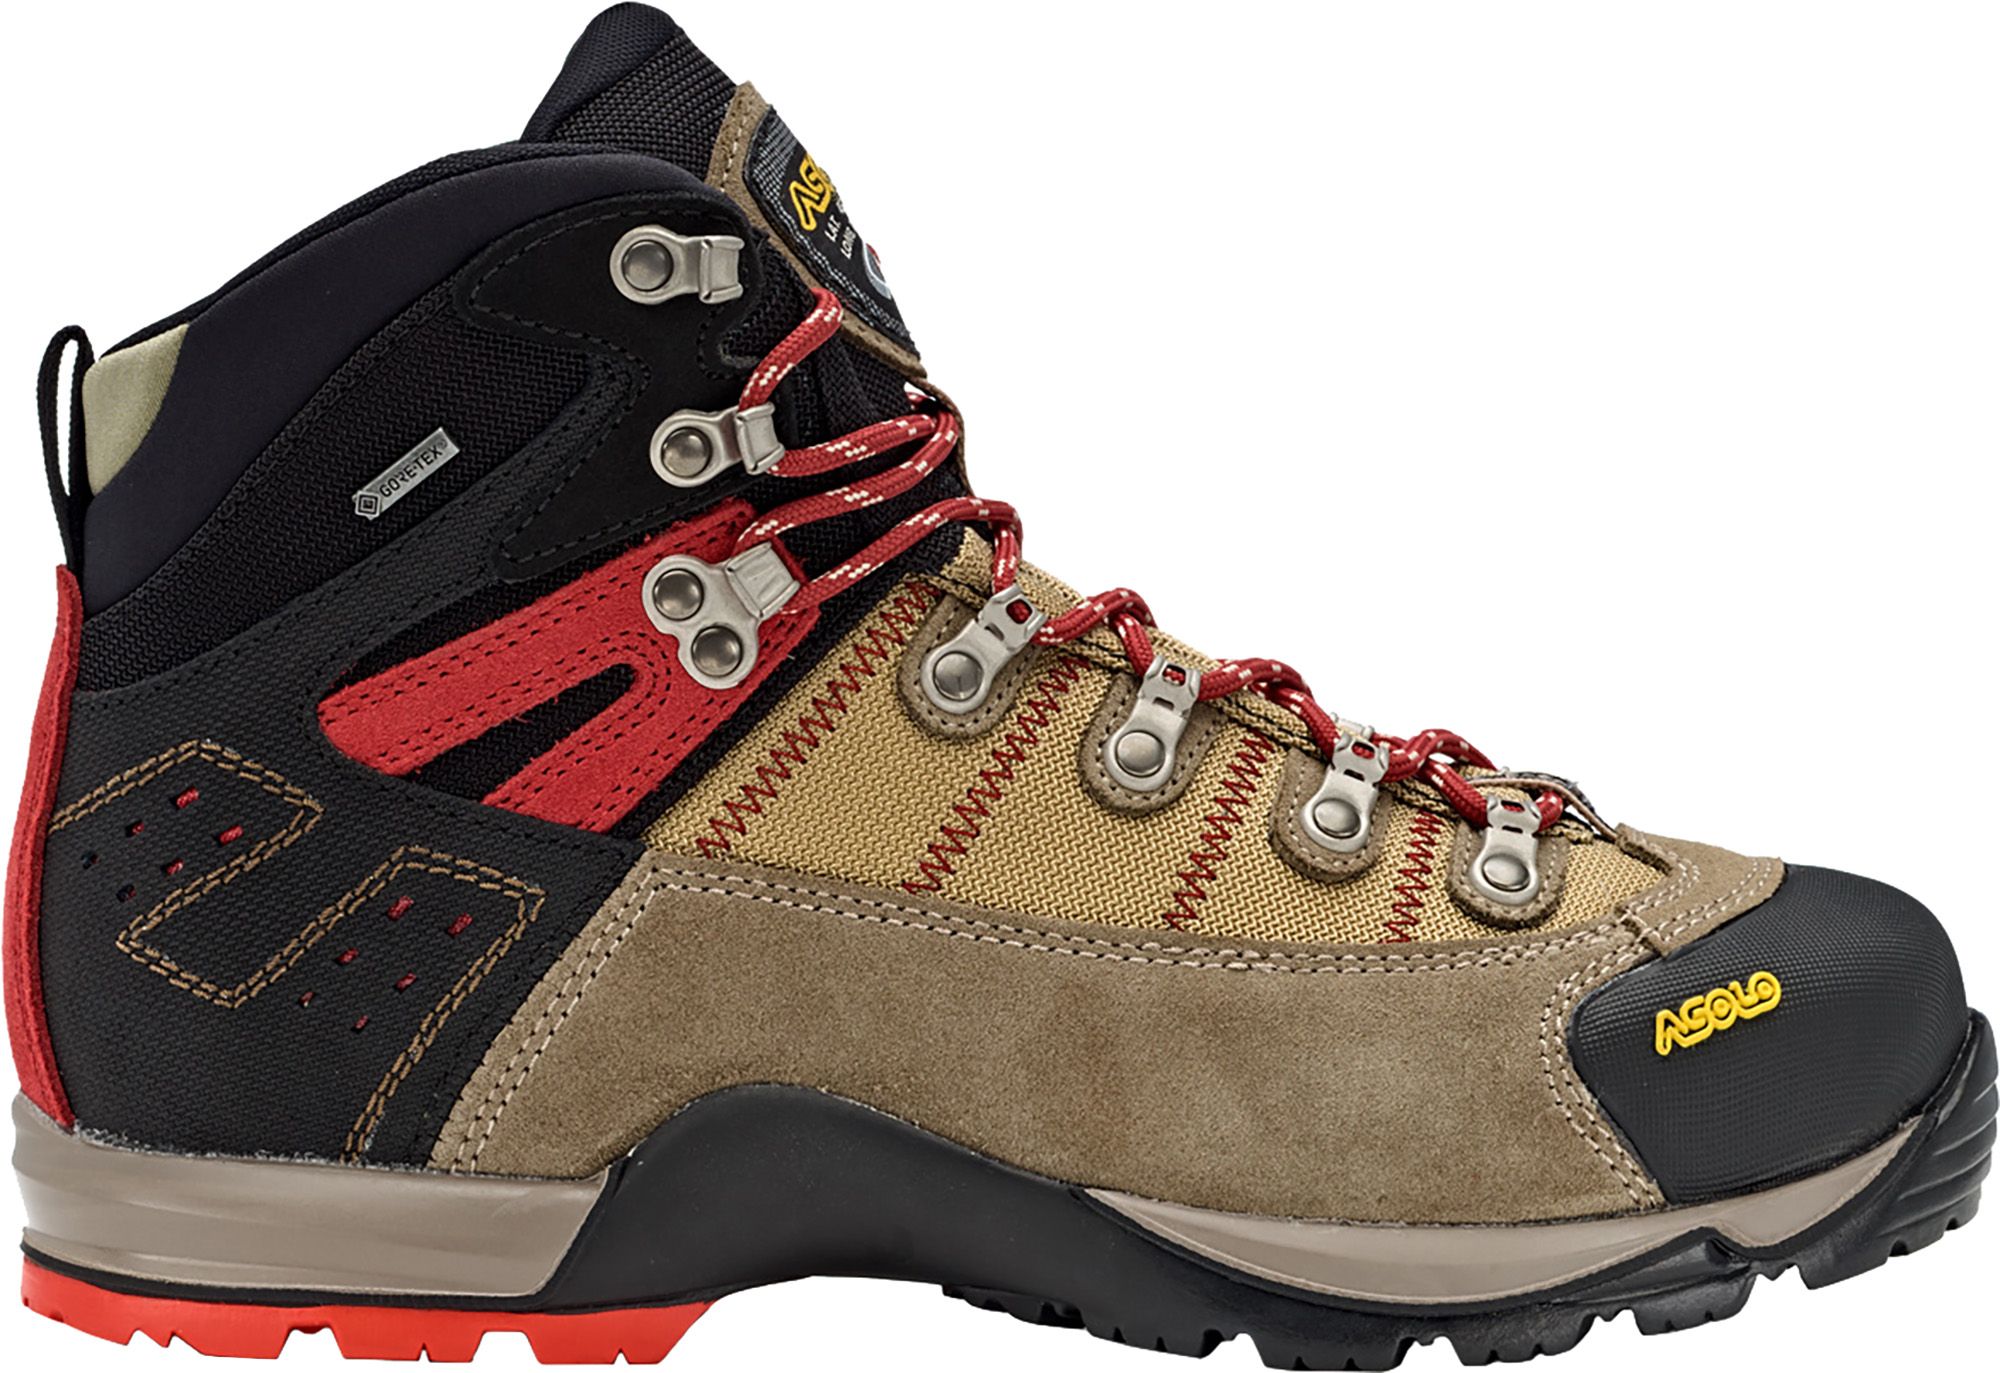 Photos - Trekking Shoes ASOLO Men's Fugitive GTX Hiking Boots, Size 8, Wool/Black | Father's Day G 